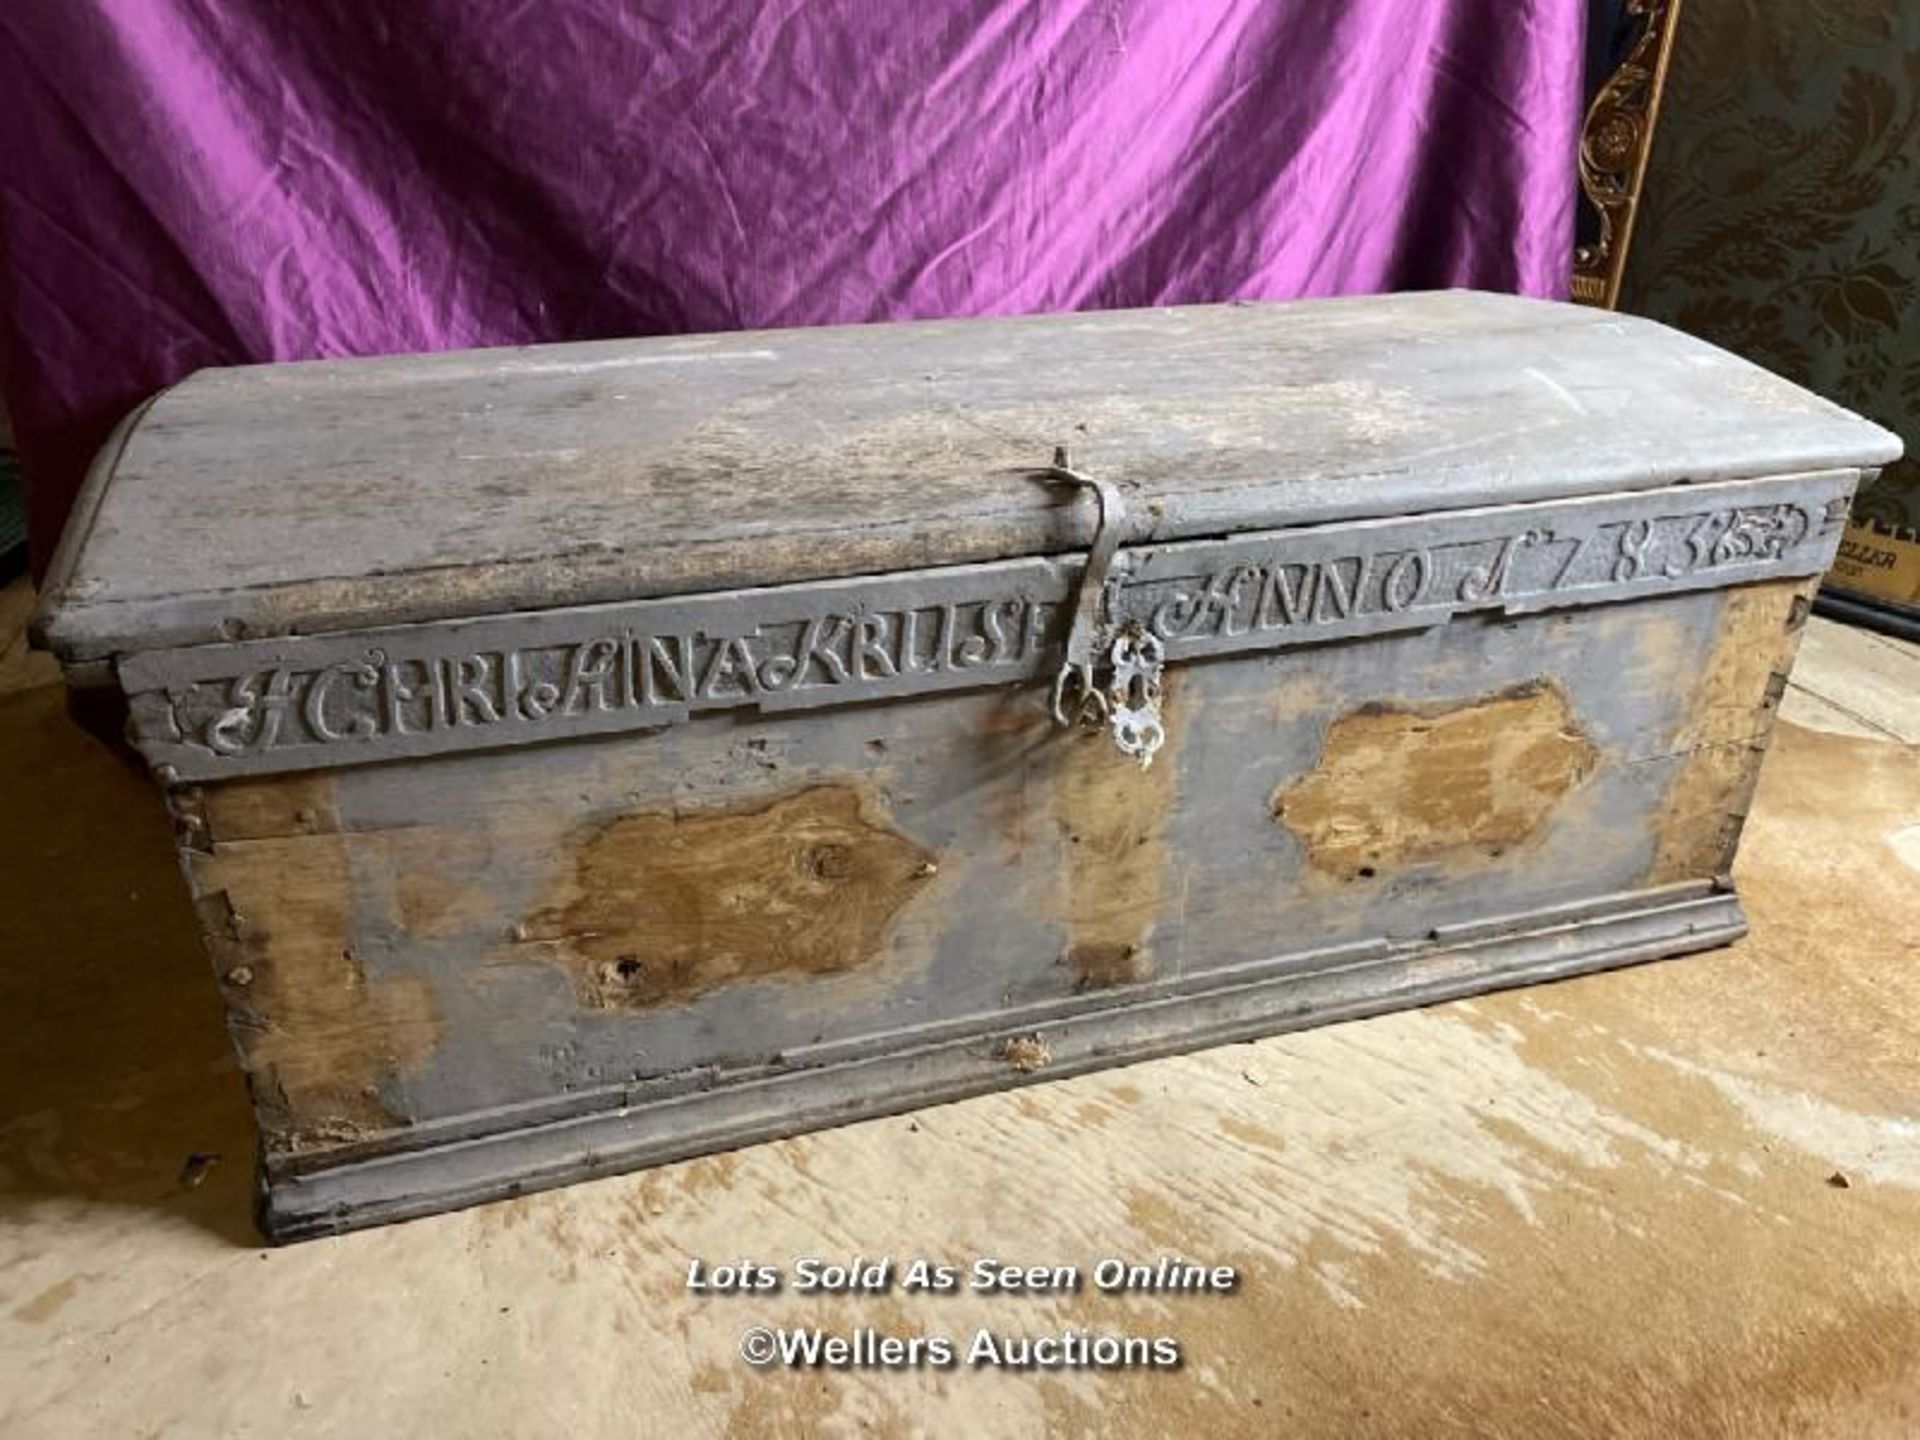 1785 CONTINENTAL MARRIAGE CHEST, IN NEED OF RESTORATION, 134 X 61 X 51CM